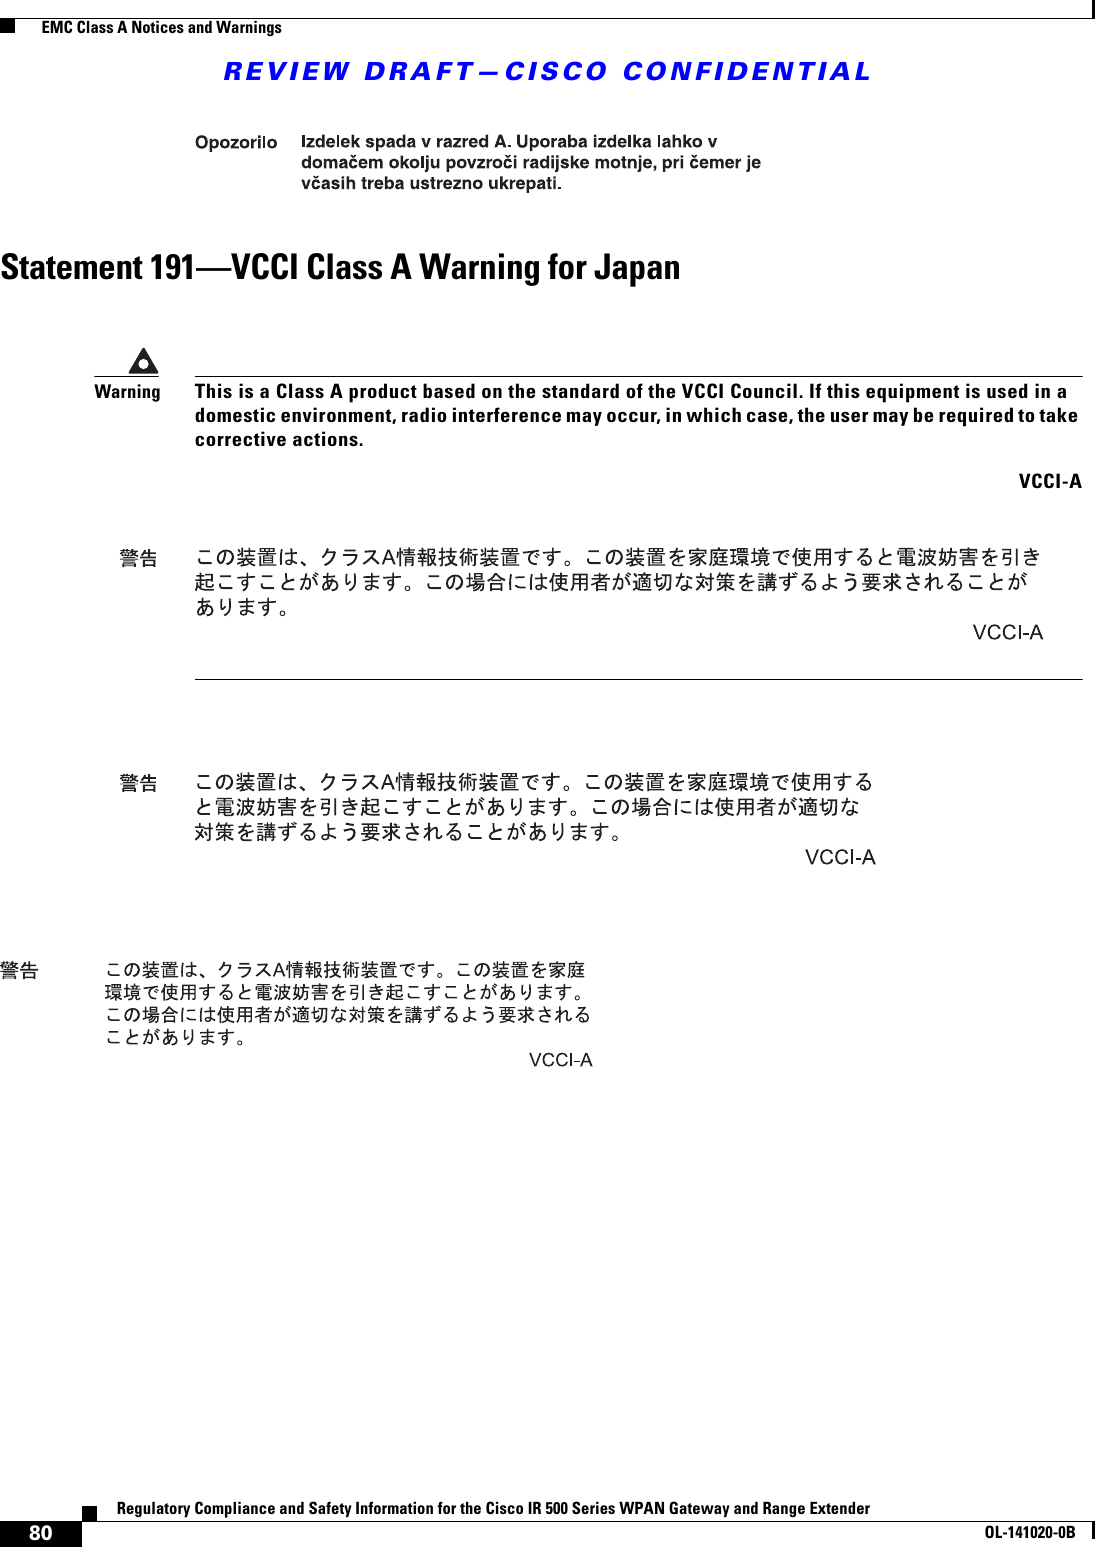 REVIEW DRAFT—CISCO CONFIDENTIAL80Regulatory Compliance and Safety Information for the Cisco IR 500 Series WPAN Gateway and Range ExtenderOL-141020-0B  EMC Class A Notices and WarningsStatement 191—VCCI Class A Warning for JapanWarningThis is a Class A product based on the standard of the VCCI Council. If this equipment is used in a domestic environment, radio interference may occur, in which case, the user may be required to take corrective actions. VCCI-A